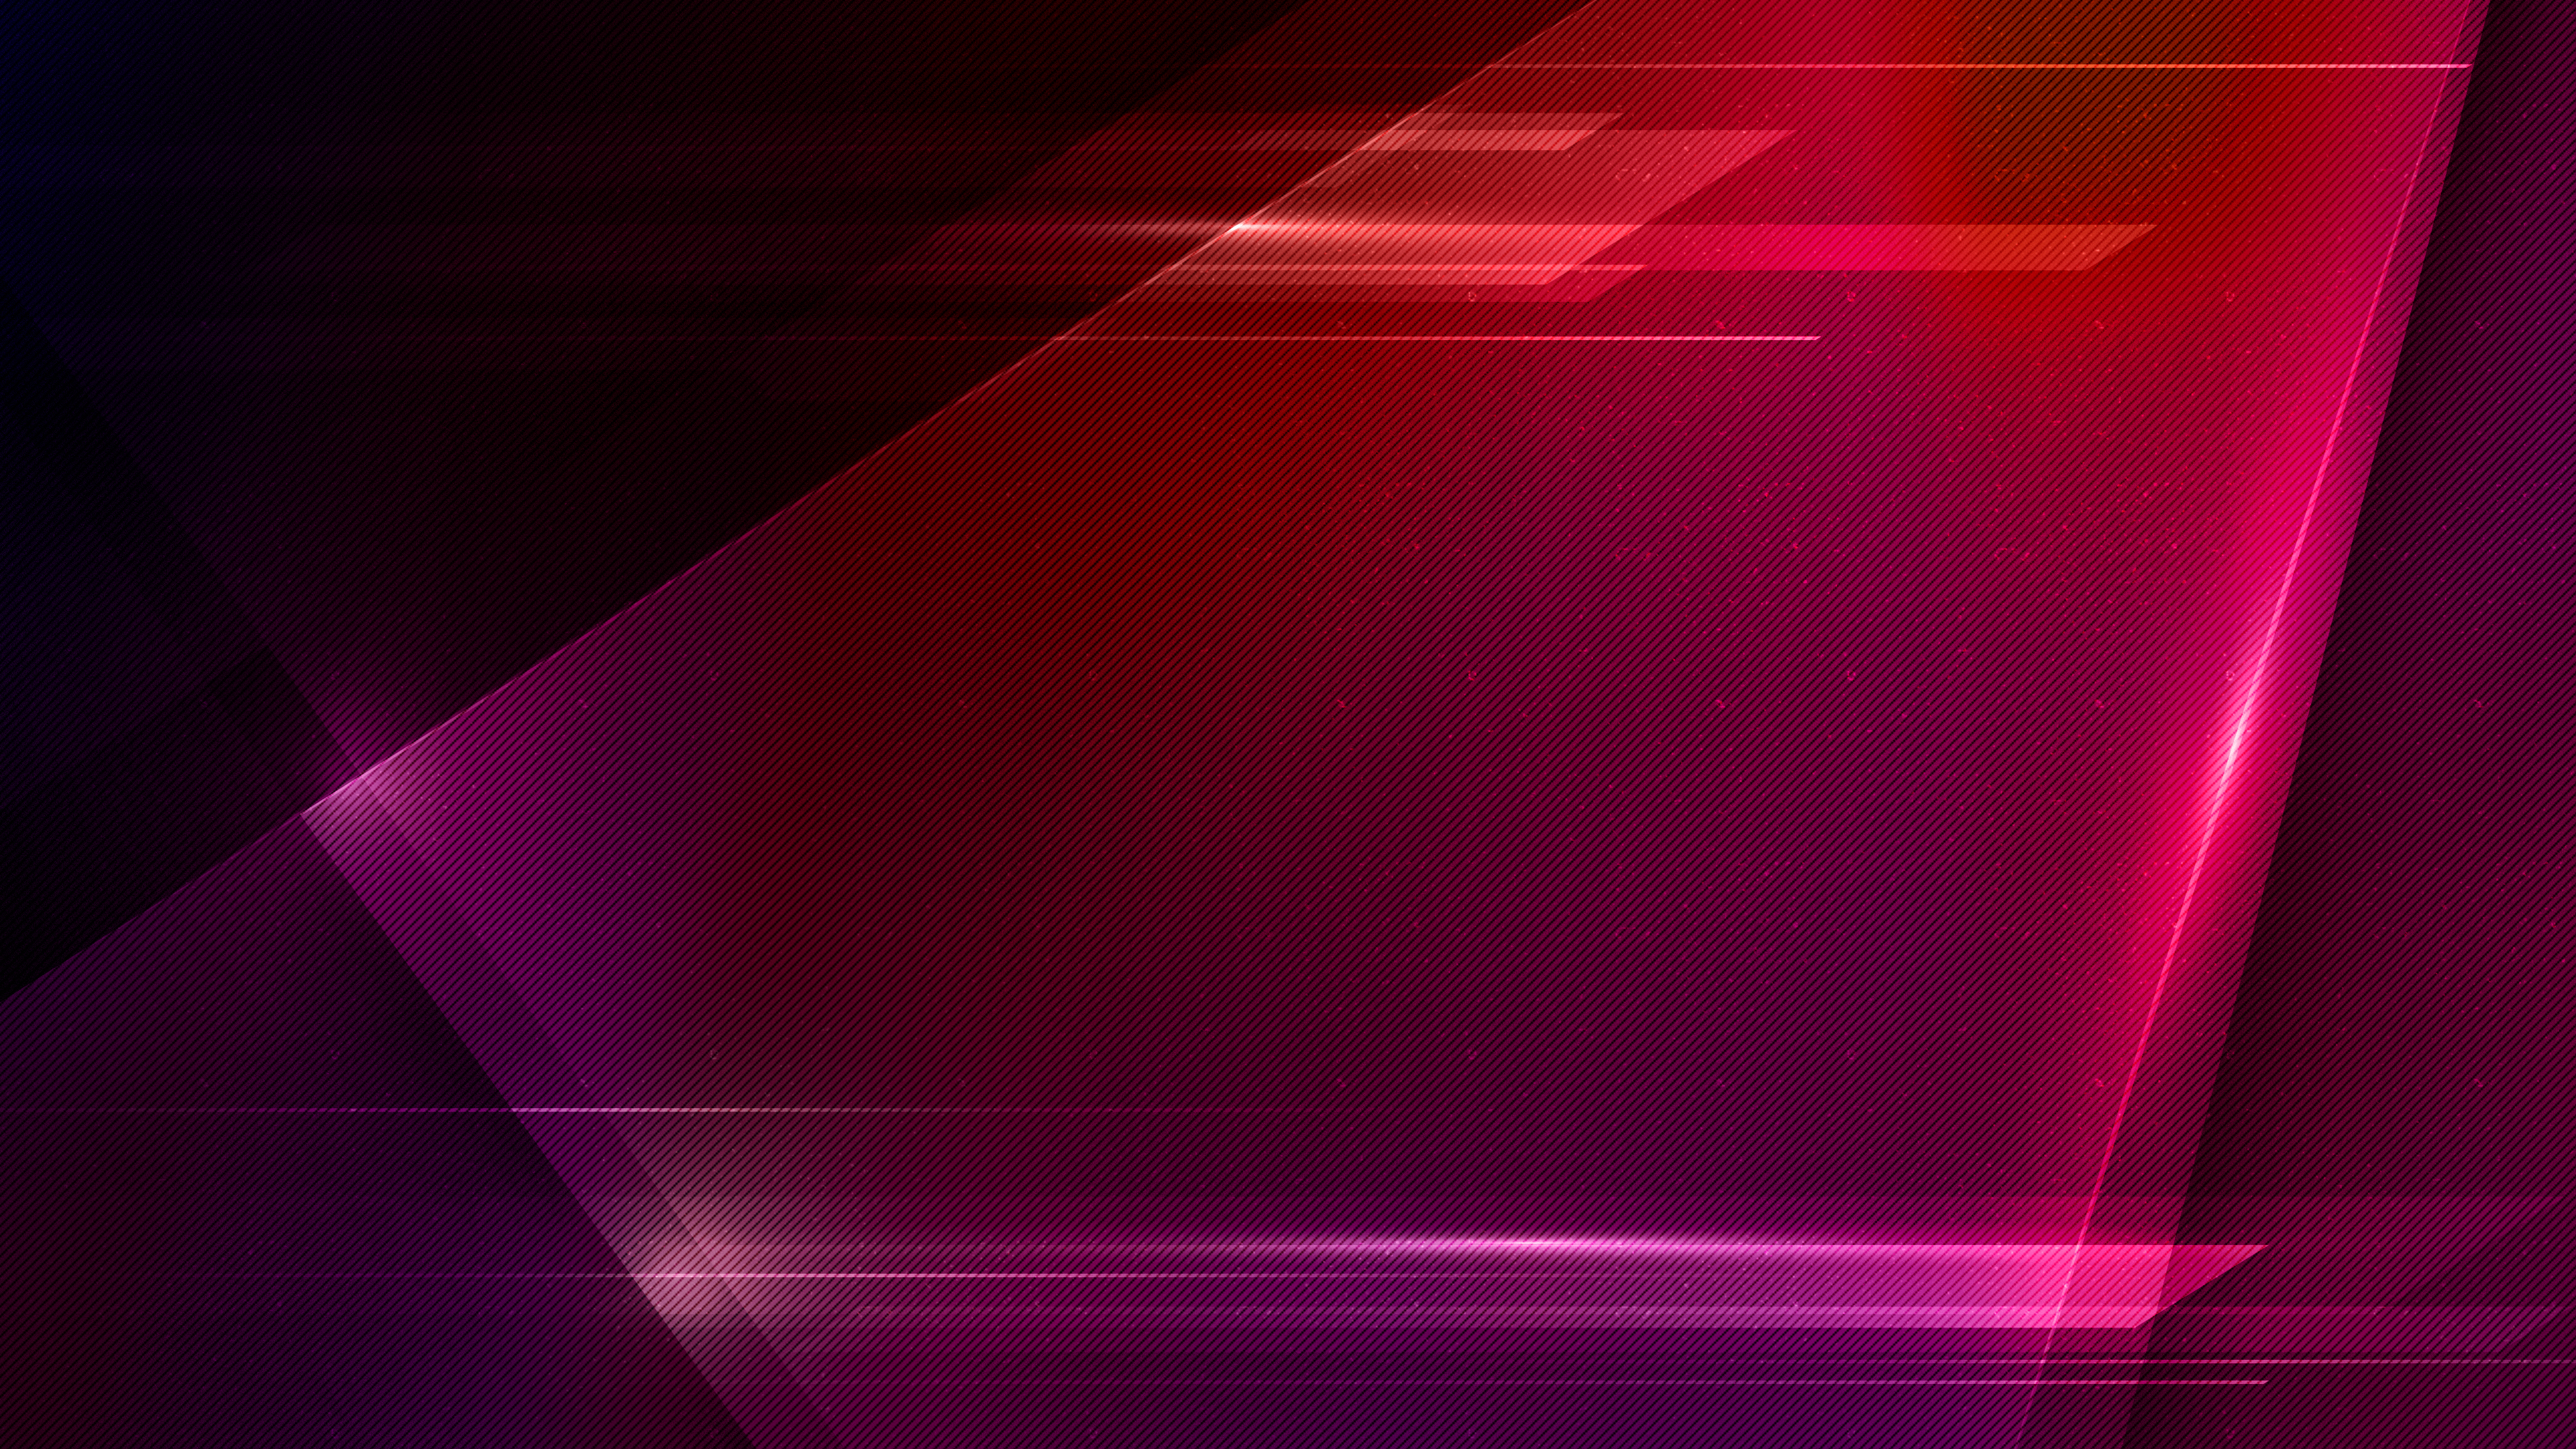 Abstract Diagonal Lines Texture Shapes 3840x2160